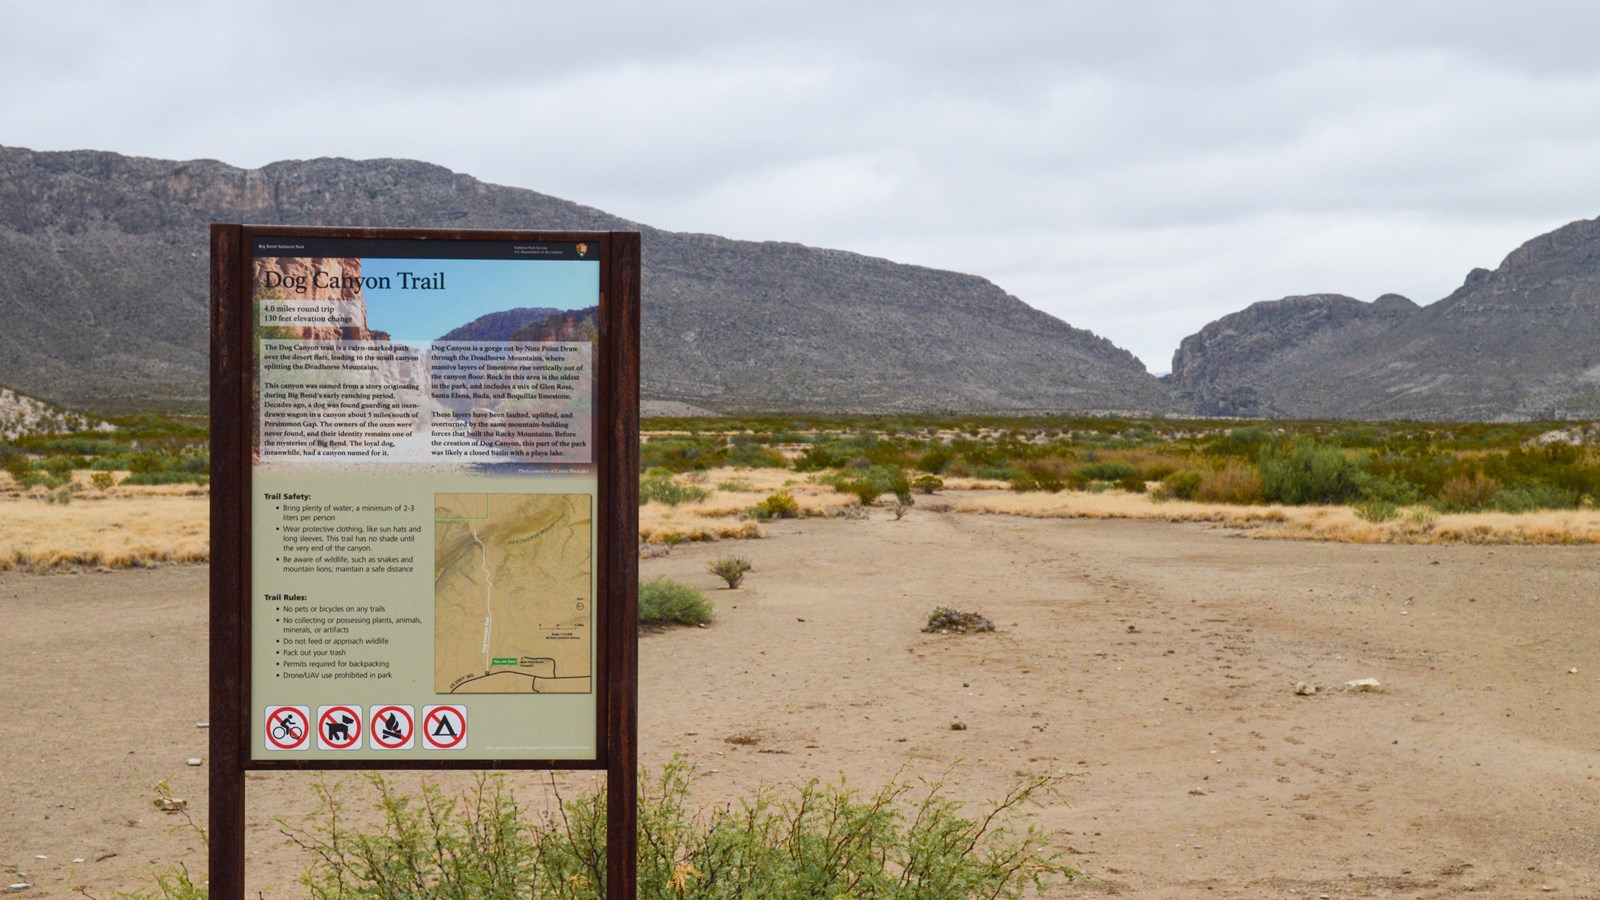 A metal sign with trail information is in front of a flat desert trail that leads to a canyon.